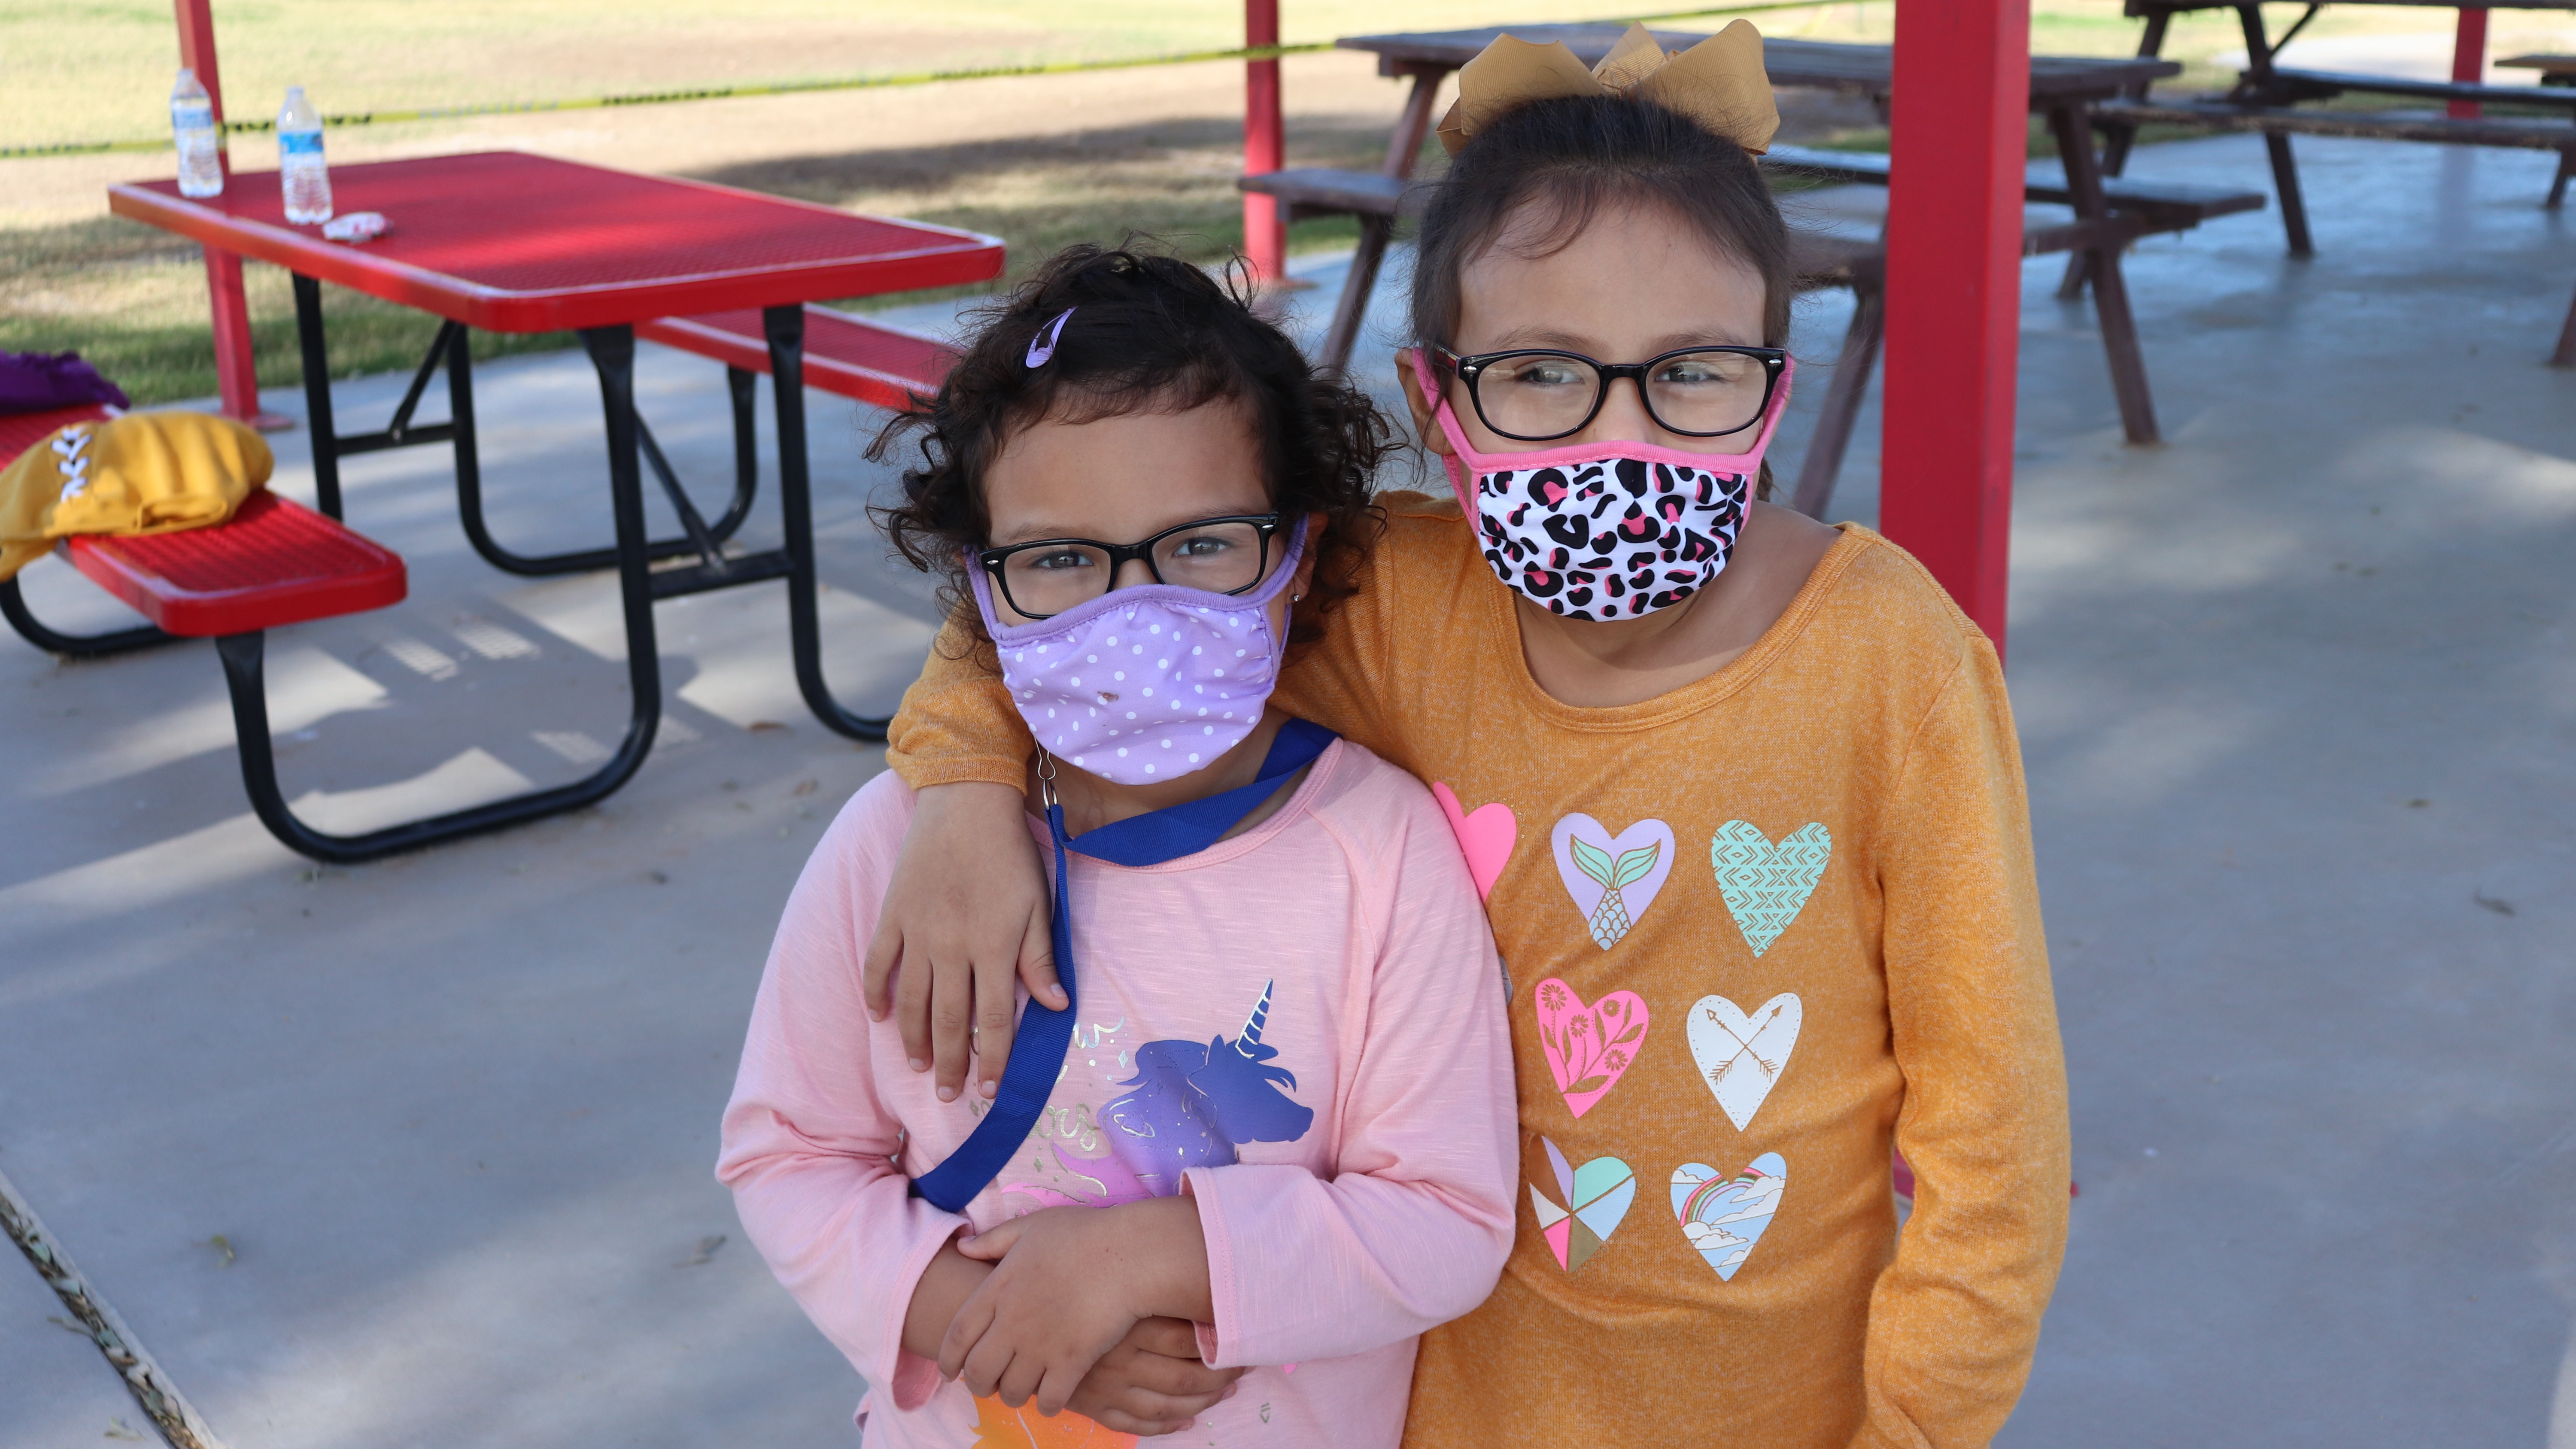 "Little Rebels" in masks on the playground.